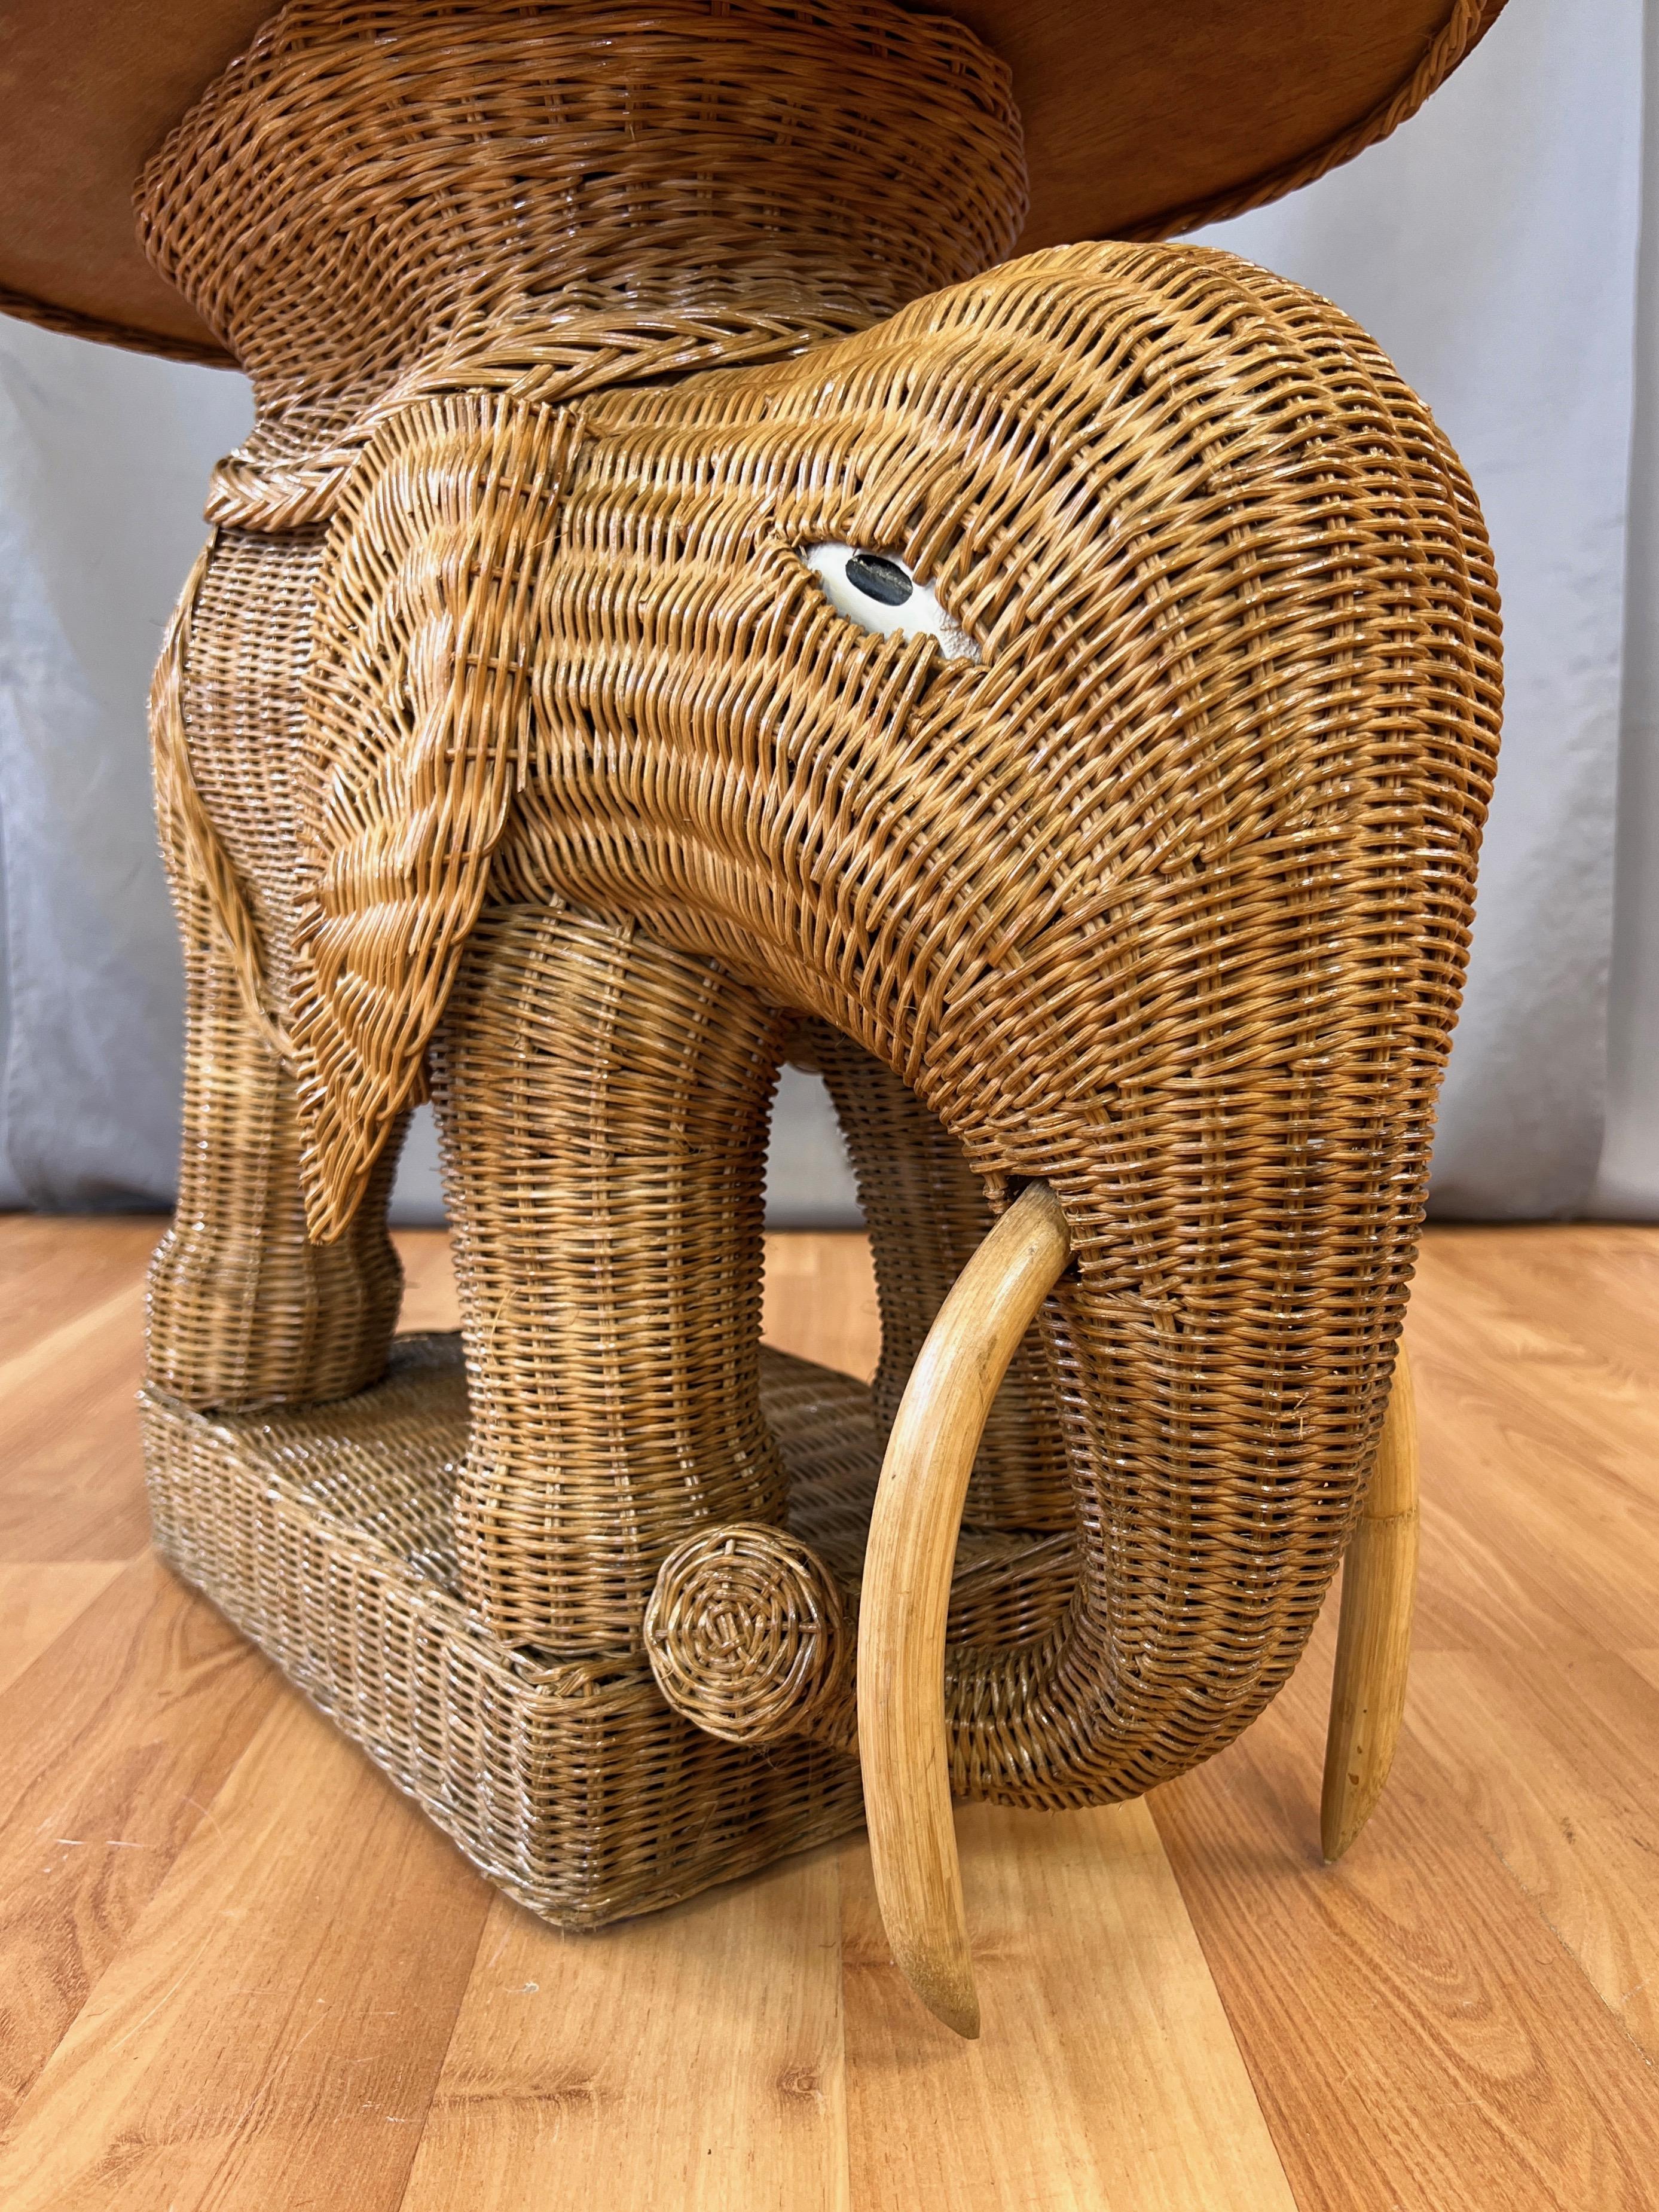 Late 20th Century Vintage Boho Chic Natural Wicker & Rattan Elephant Side Table with Tray, 1970s For Sale